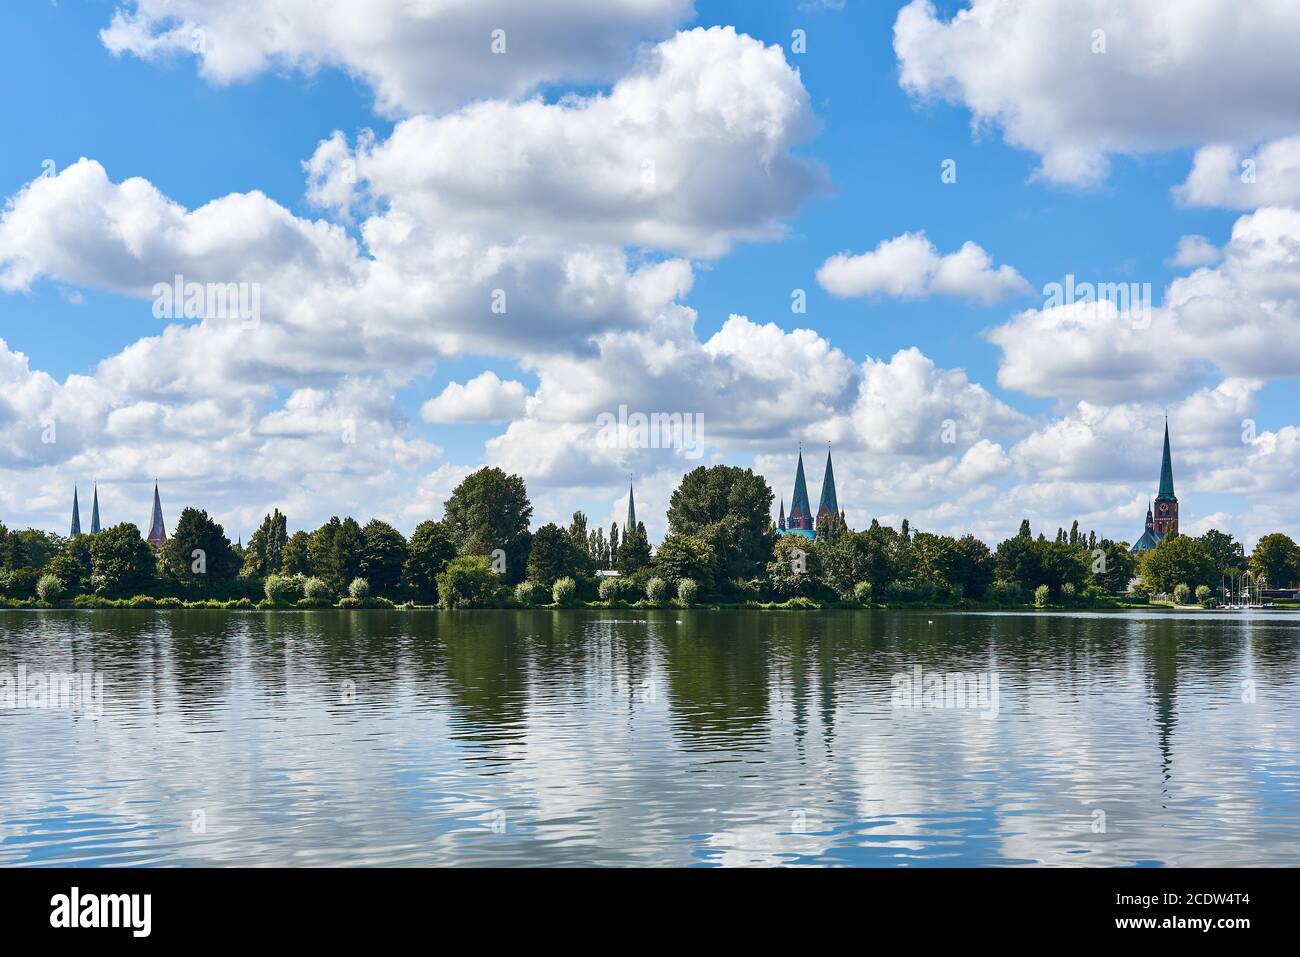 The Seven Towers of Lübeck, Germany Stock Photo